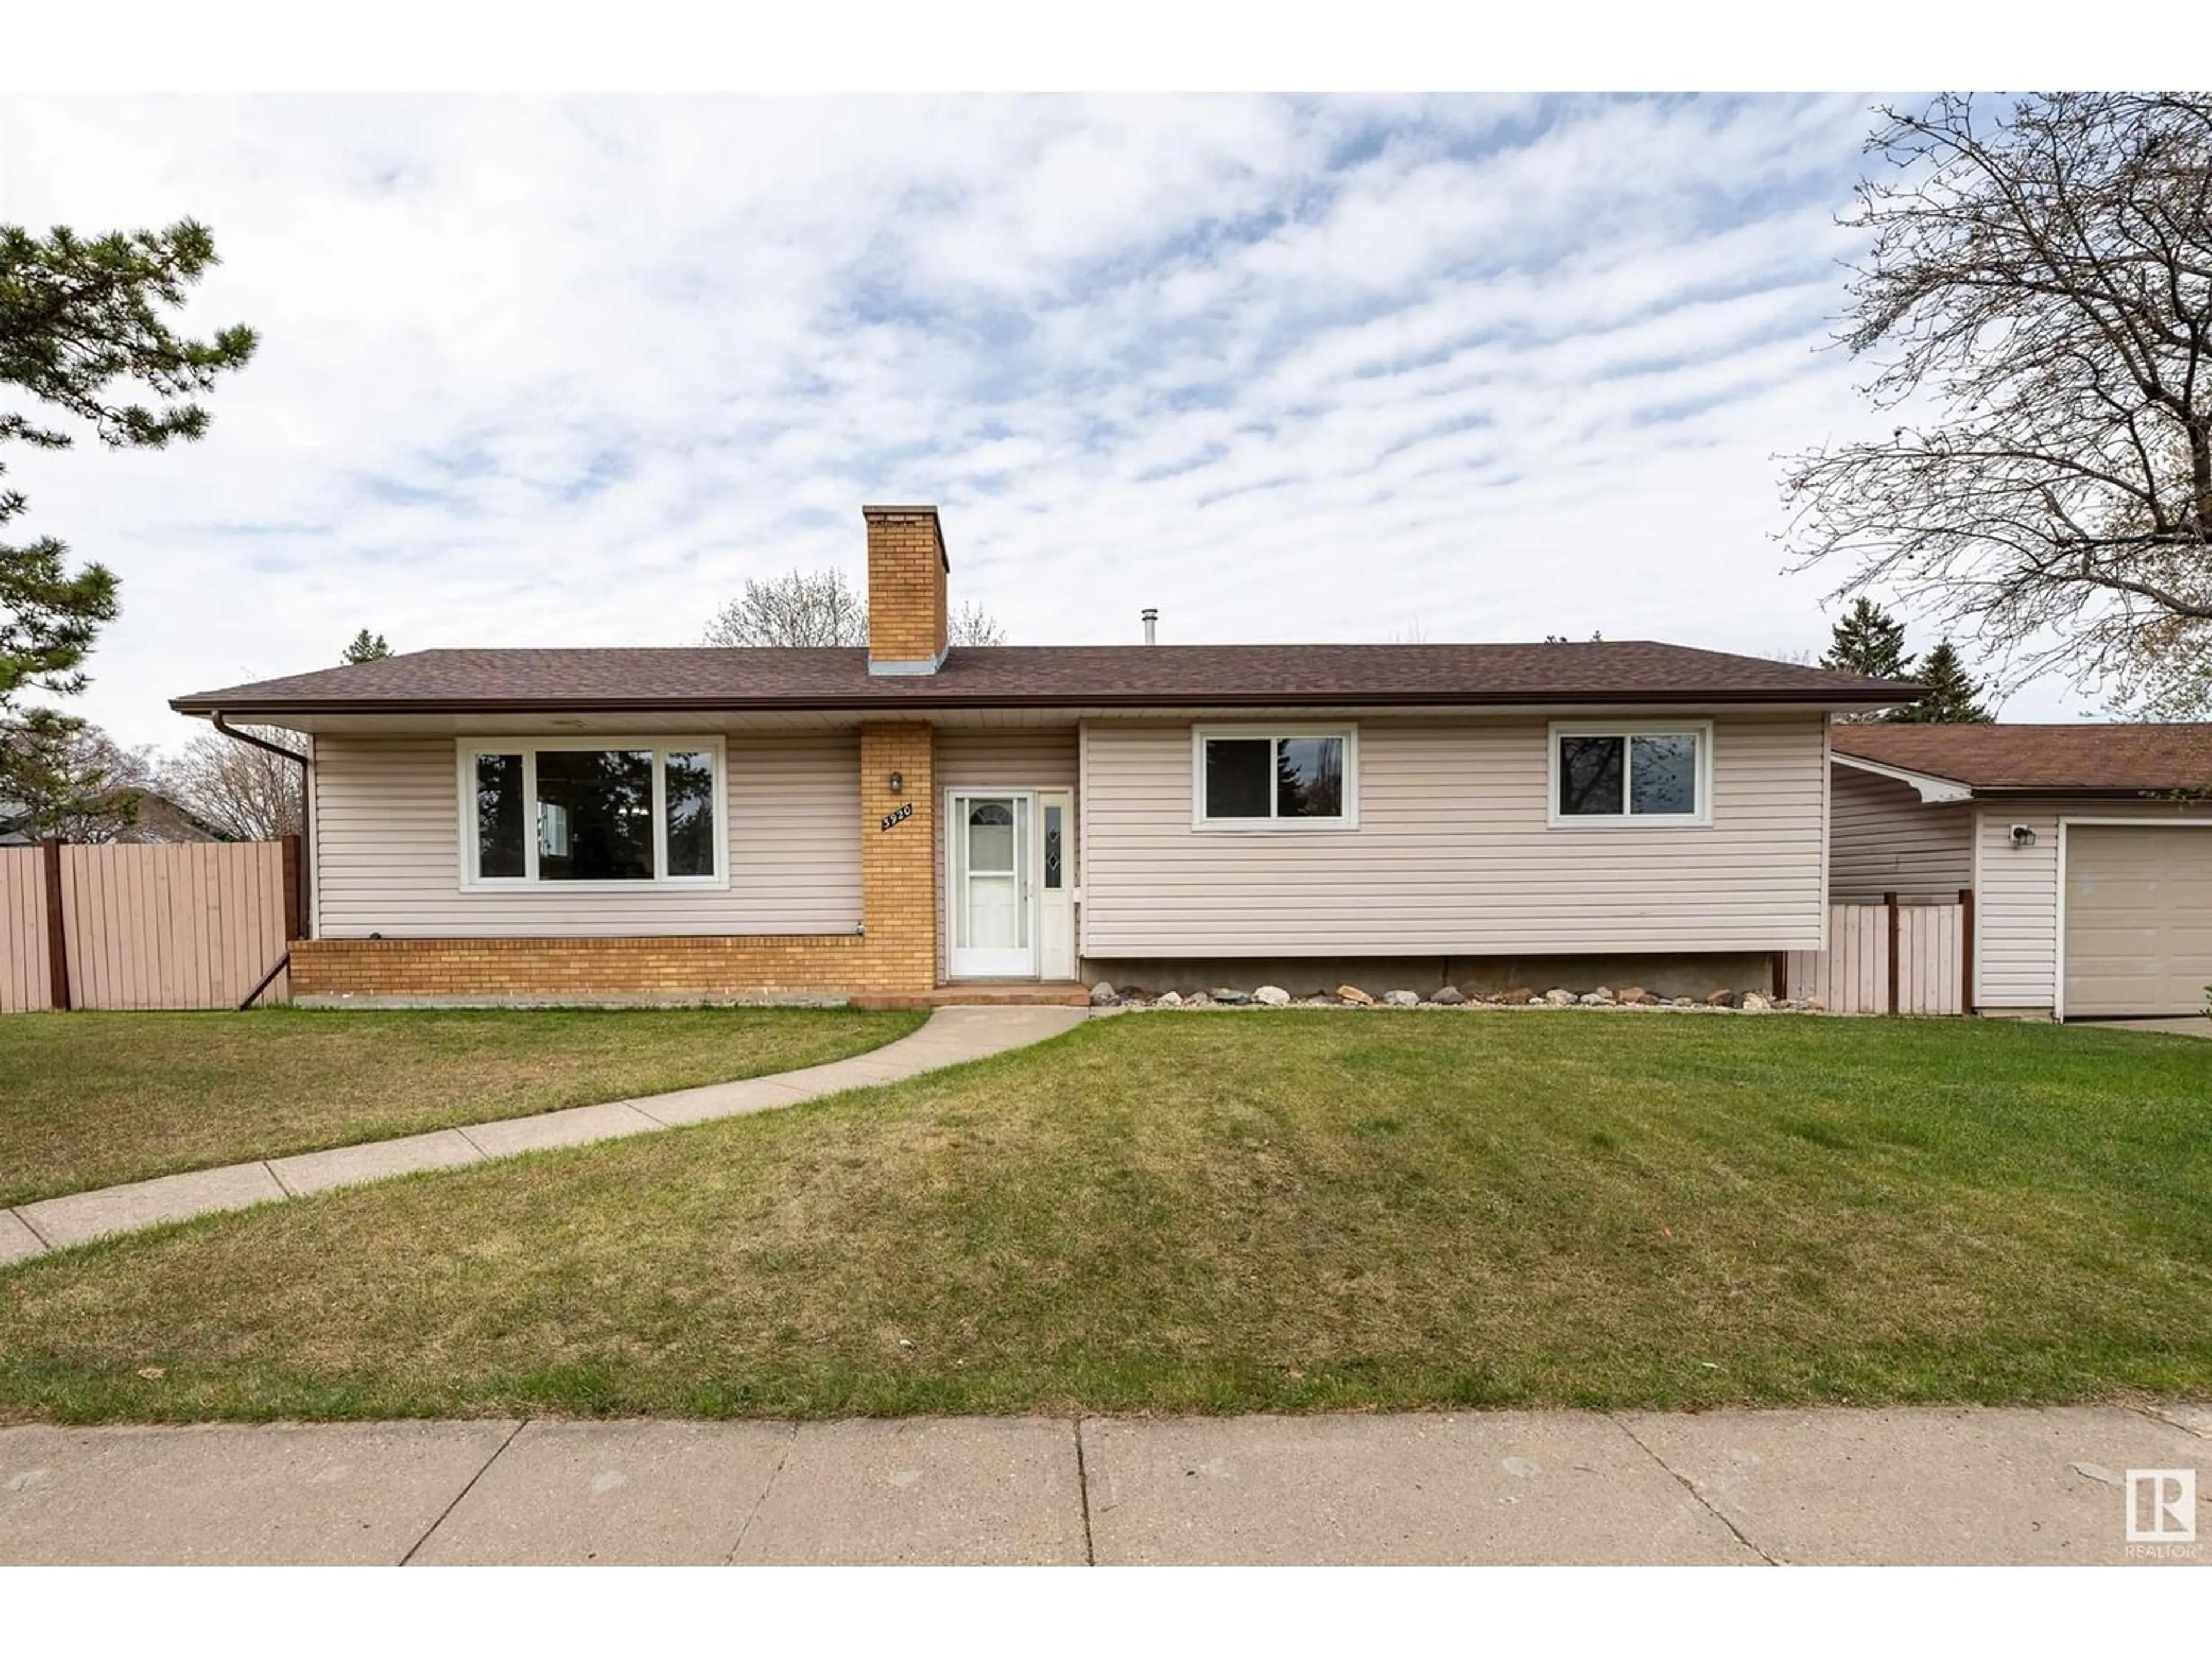 Frontside or backside of a home for 3920 117 ST NW, Edmonton Alberta T6J1T3